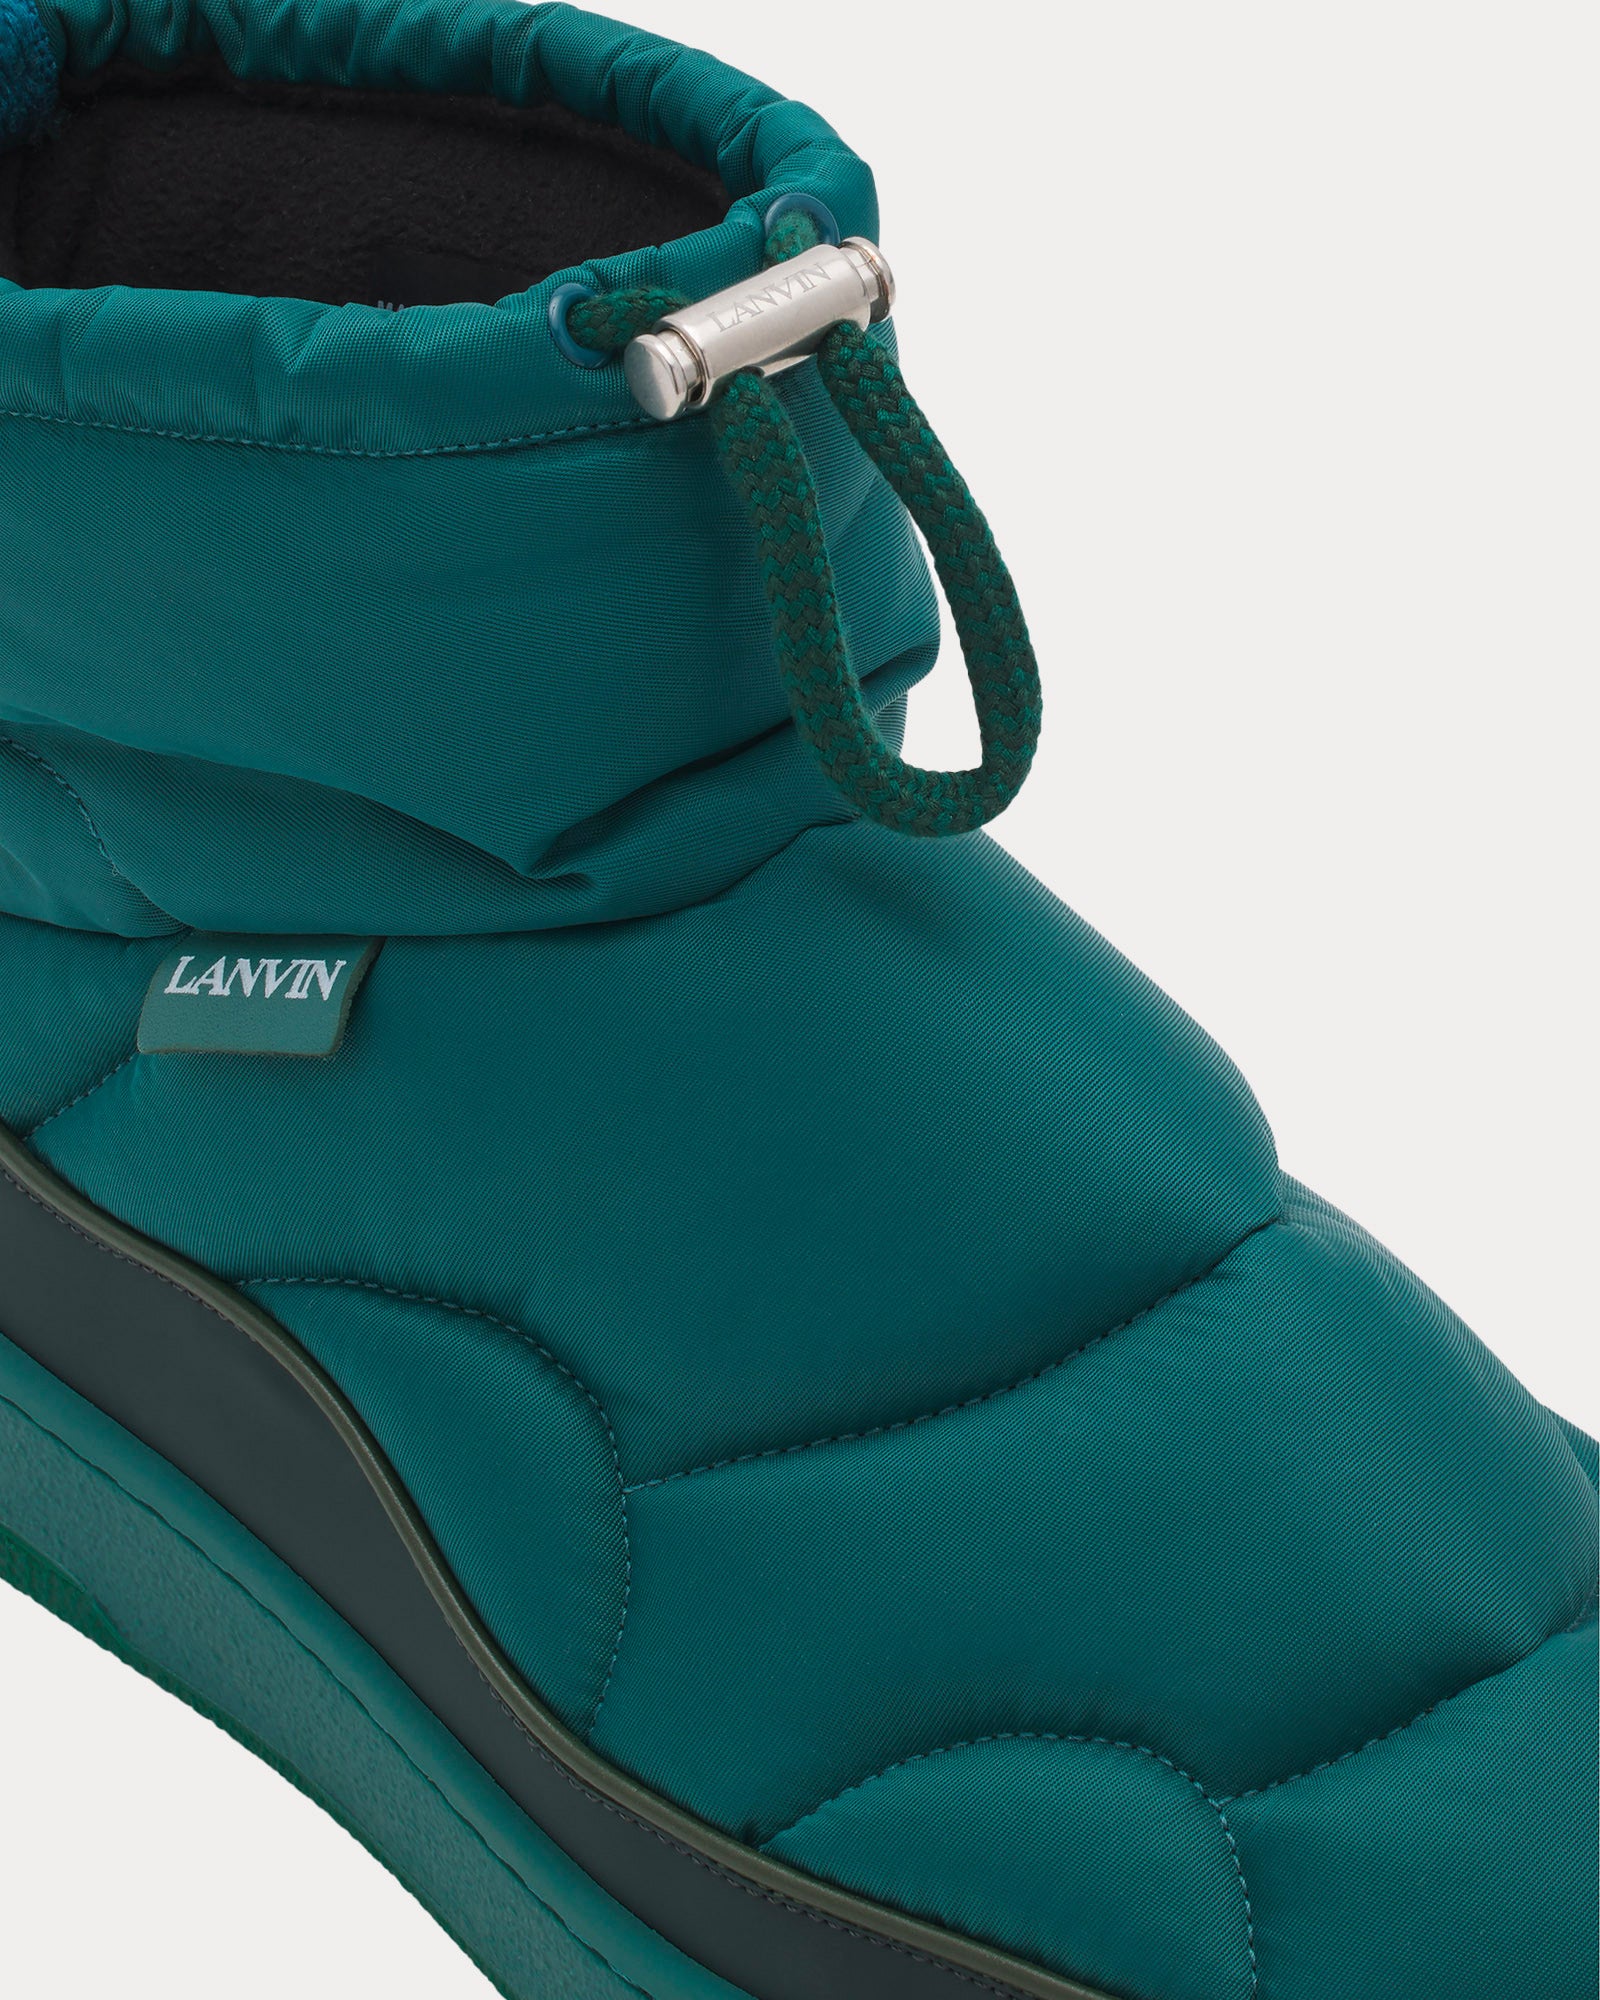 Lanvin - Curb Snow Ankle Nylon Forest Boots